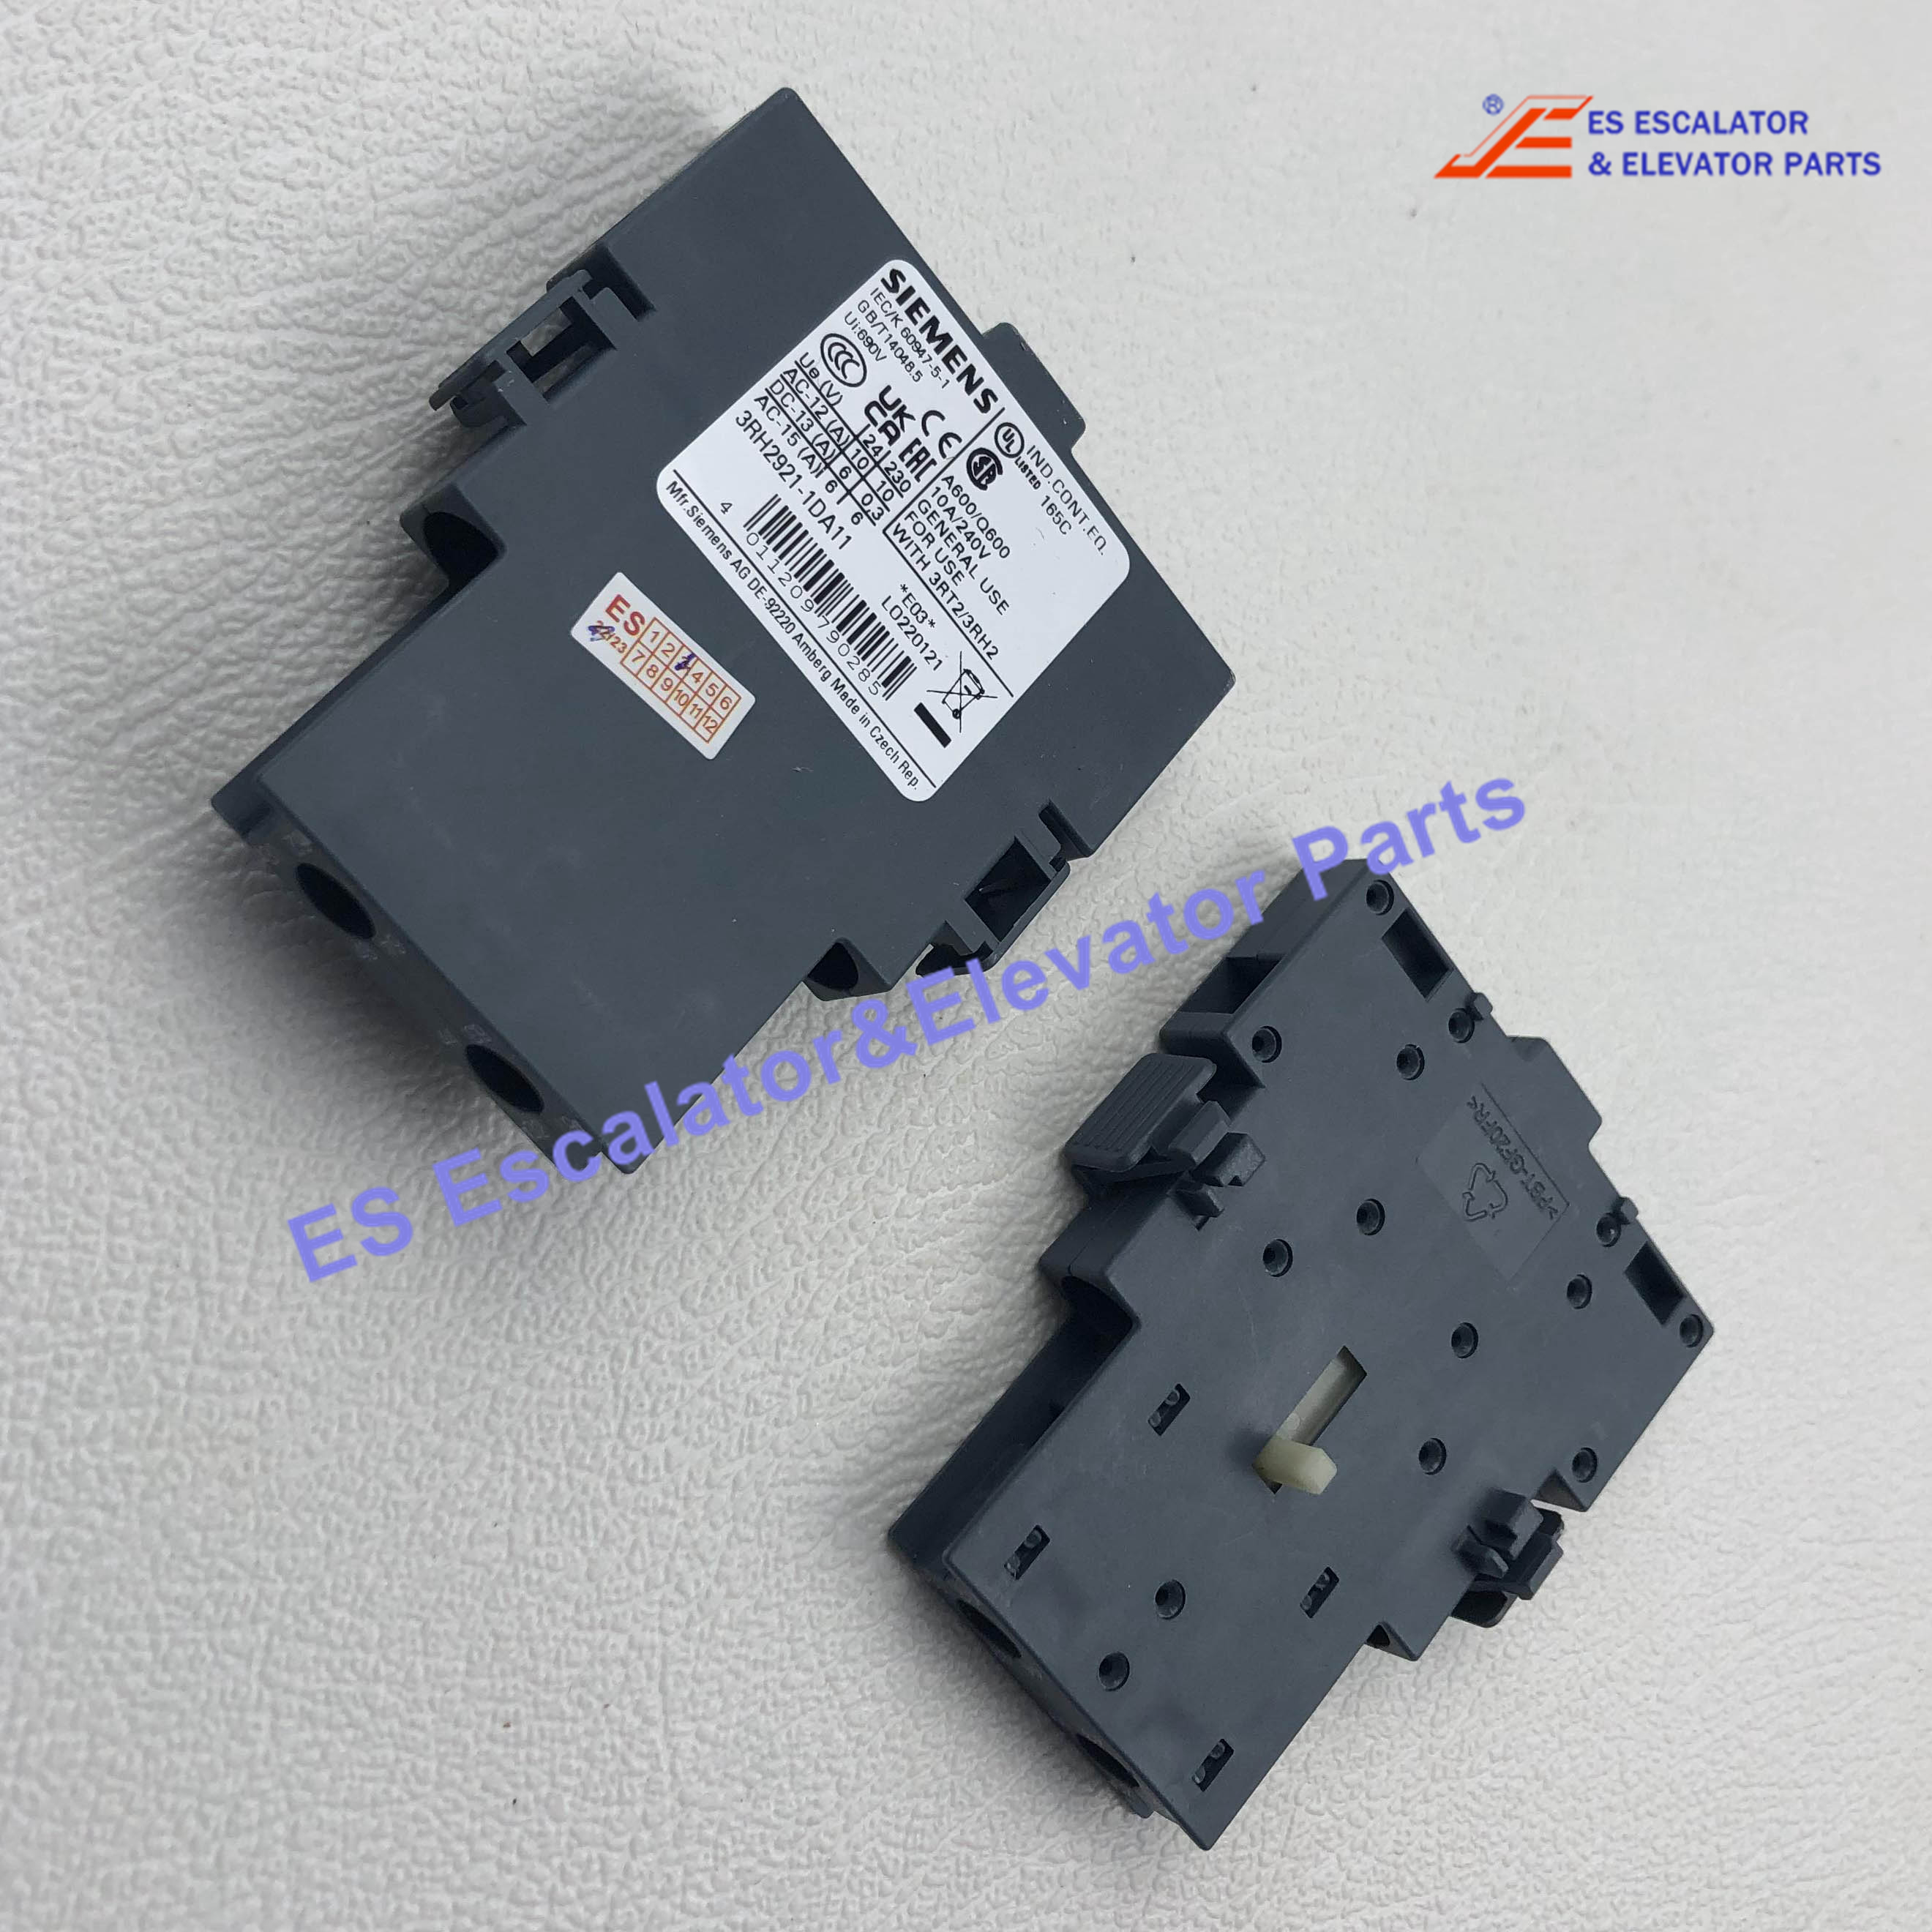 3RH2921-1DA02 Elevator Auxiliary Switch Lateral 2 NC Current Path 1 NC 1 NC For 3RH And 3RT Screw Terminal R: 31/32 41/42 L: 51/52 61/62 Use For Siemens